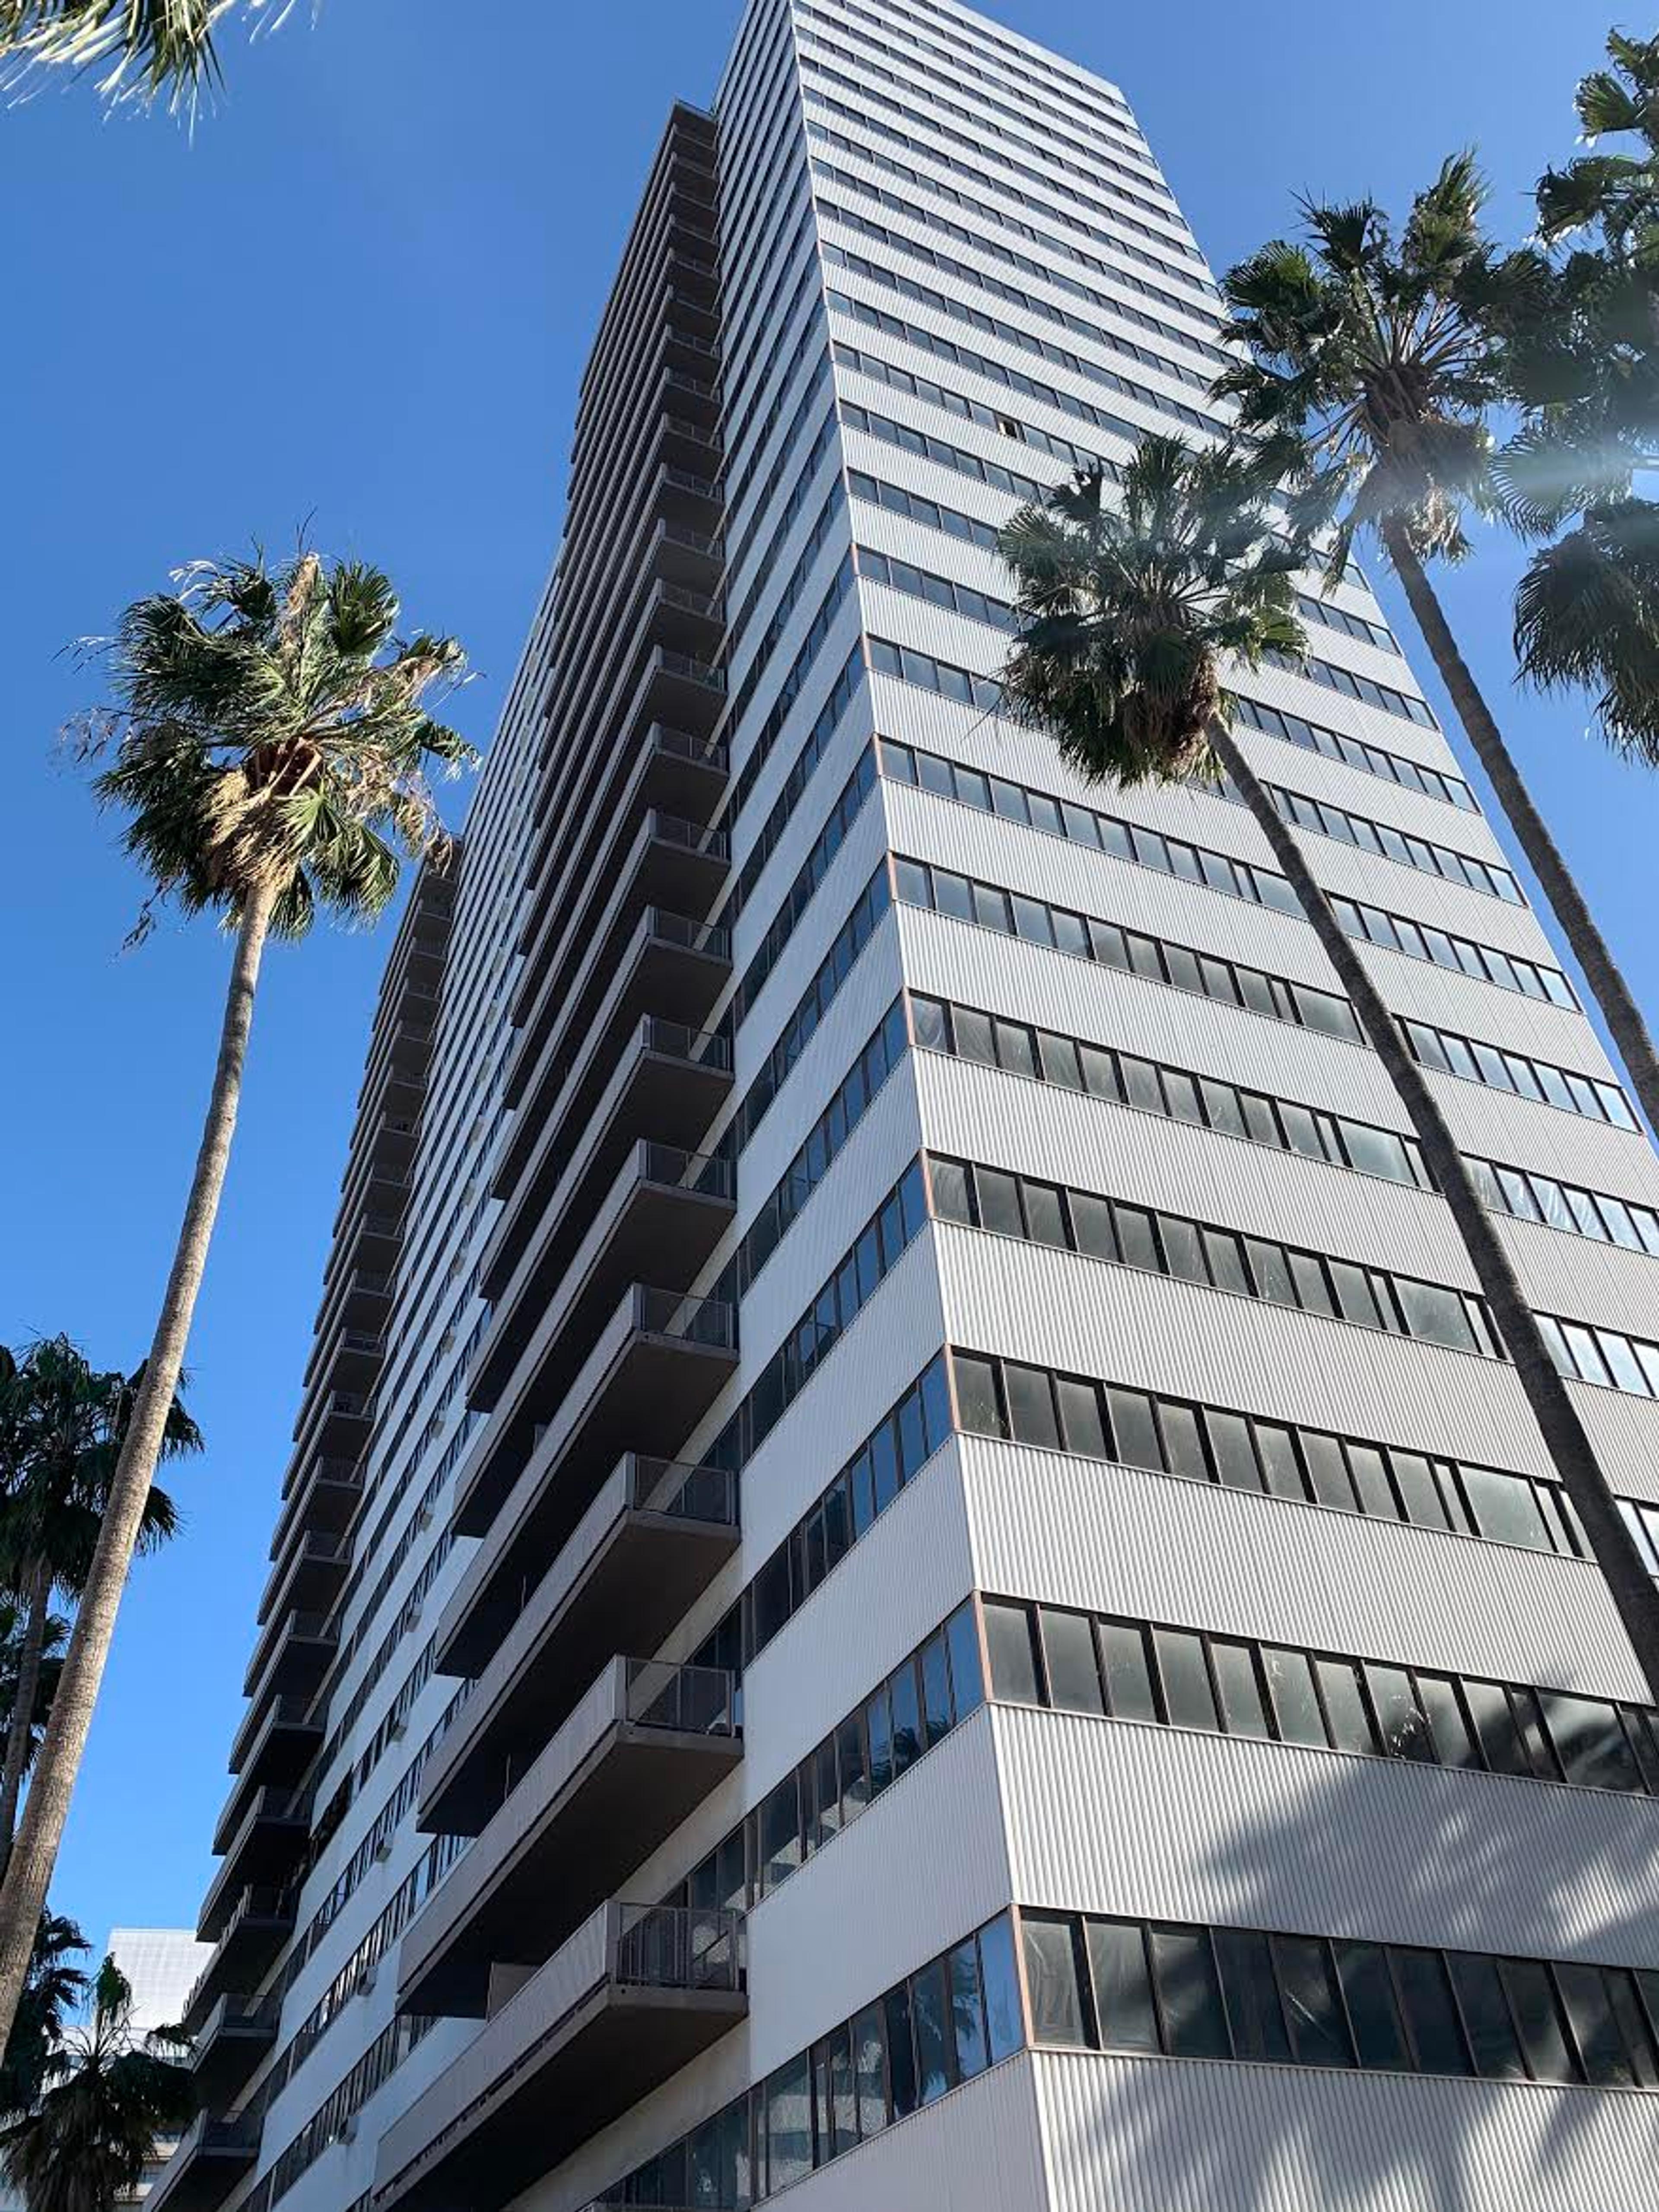 Barrington Plaza tower with palm trees